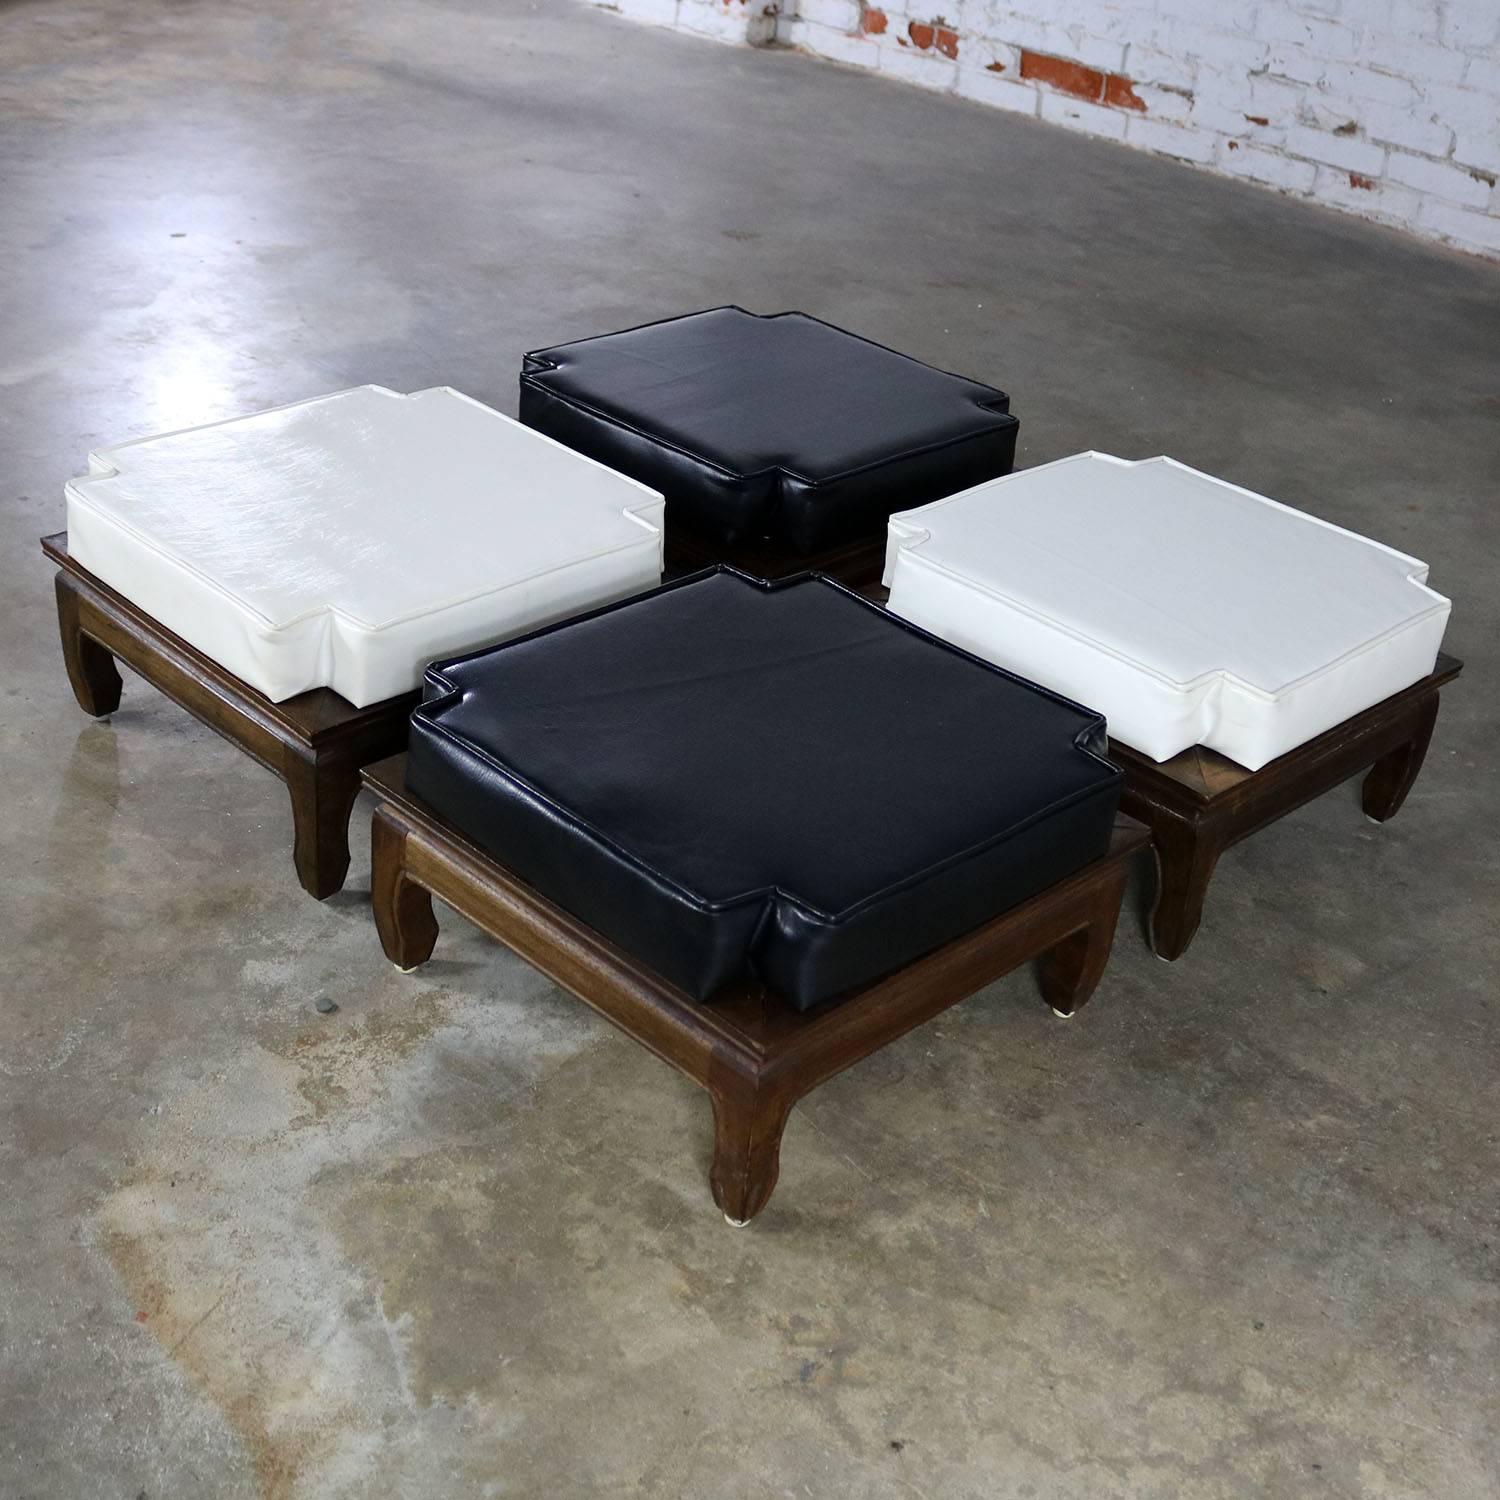 Awesome and unusual stacking ottomans with black and white upholstered cushion tops and Ming style teak base and feet. This set of four is in fabulous vintage circa mid-century original condition.

This is such a fun and handsome set of four